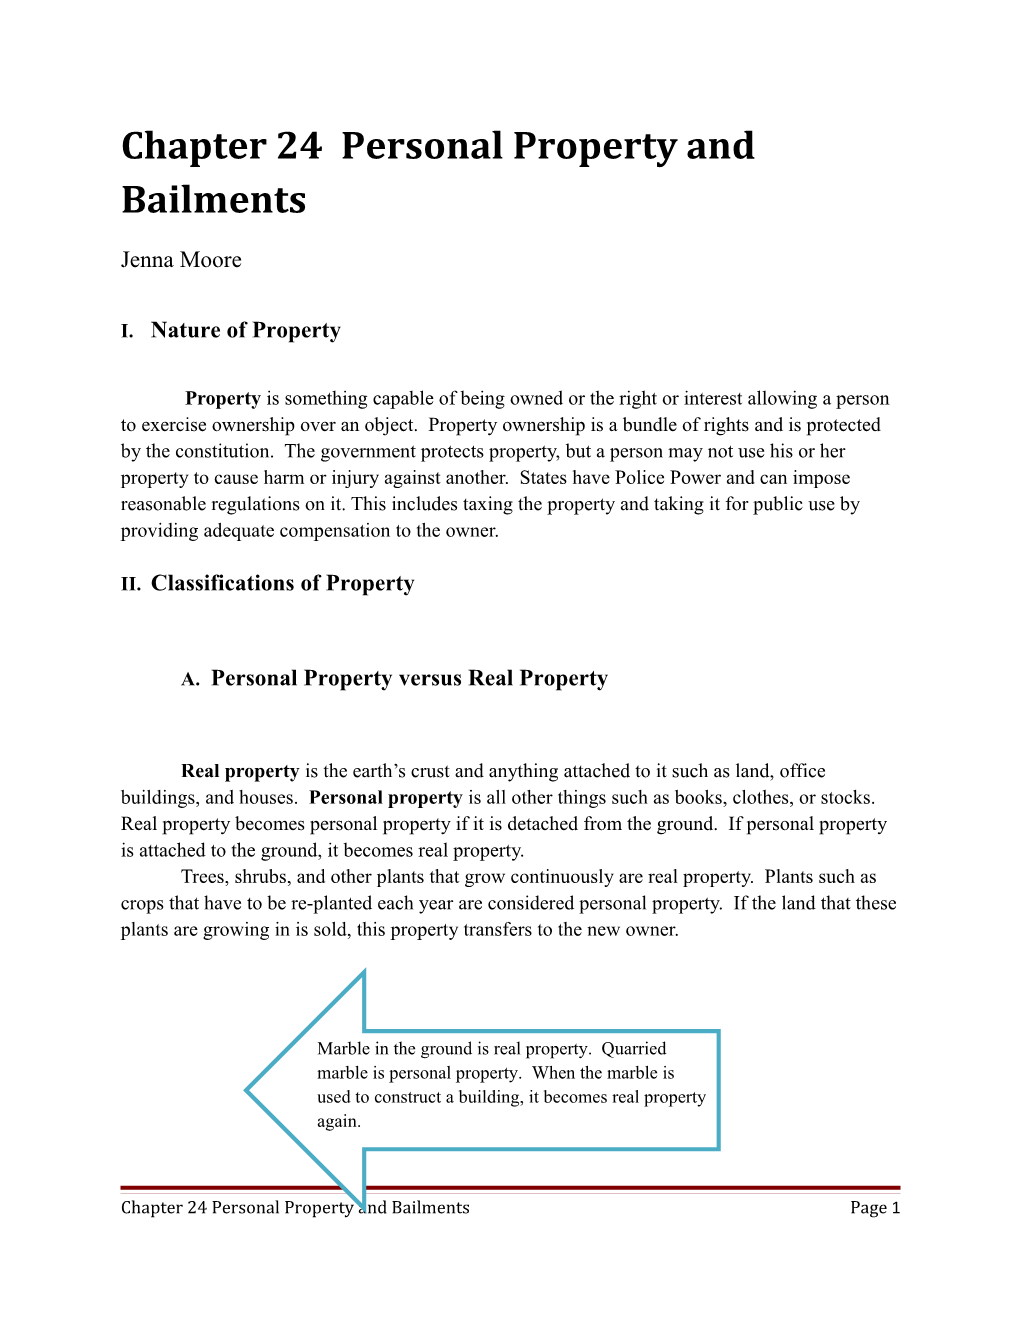 Chapter 24 Personal Property and Bailments